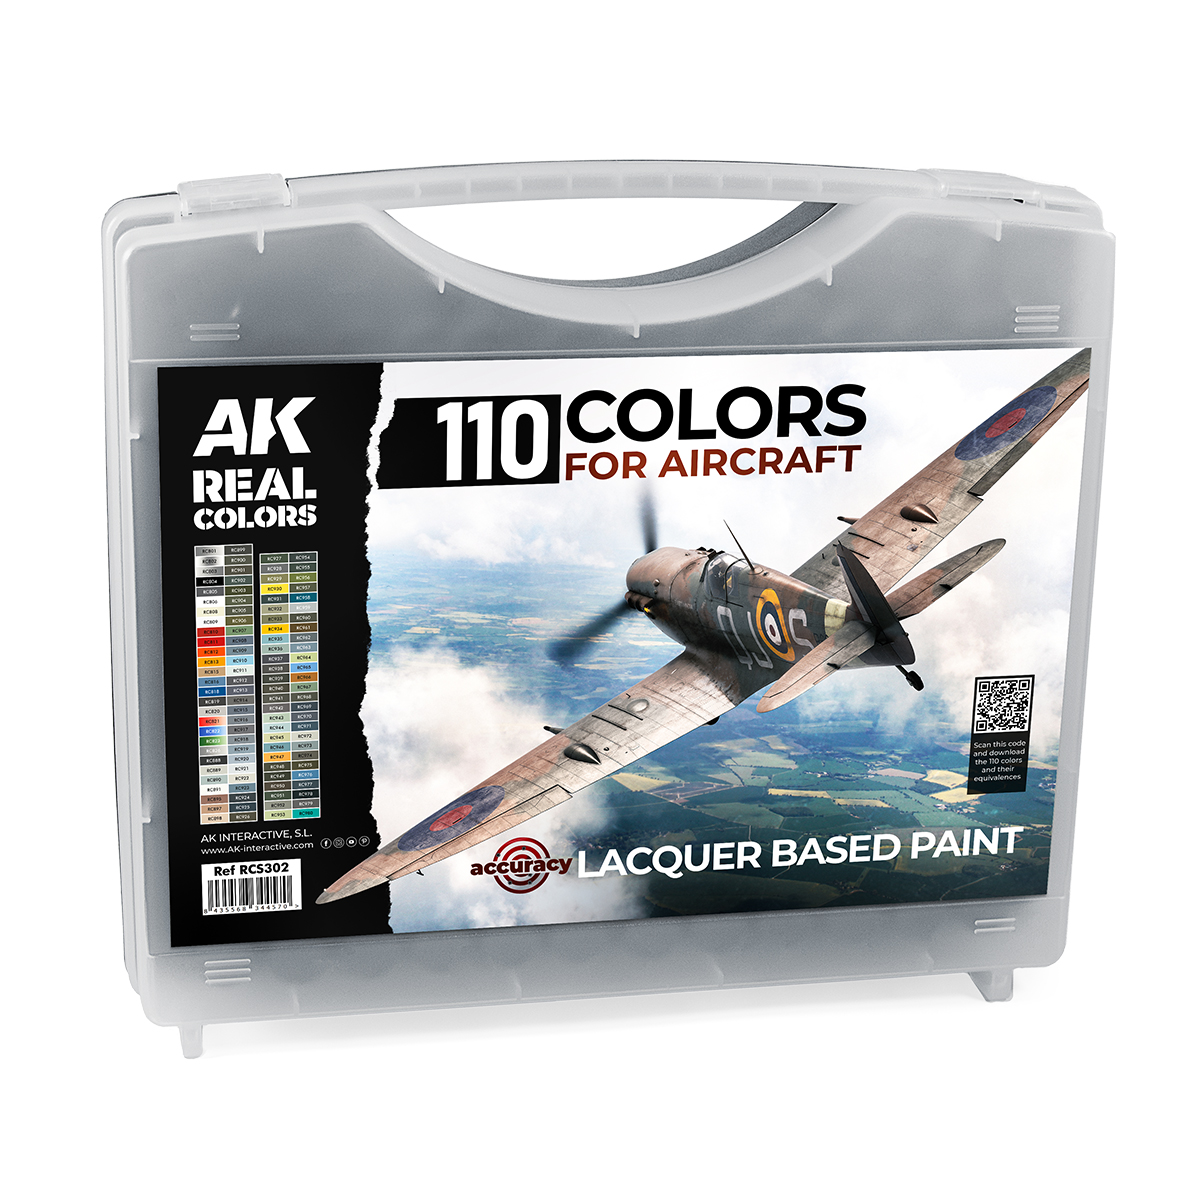 110 REAL COLORS FOR AIRCRAFT